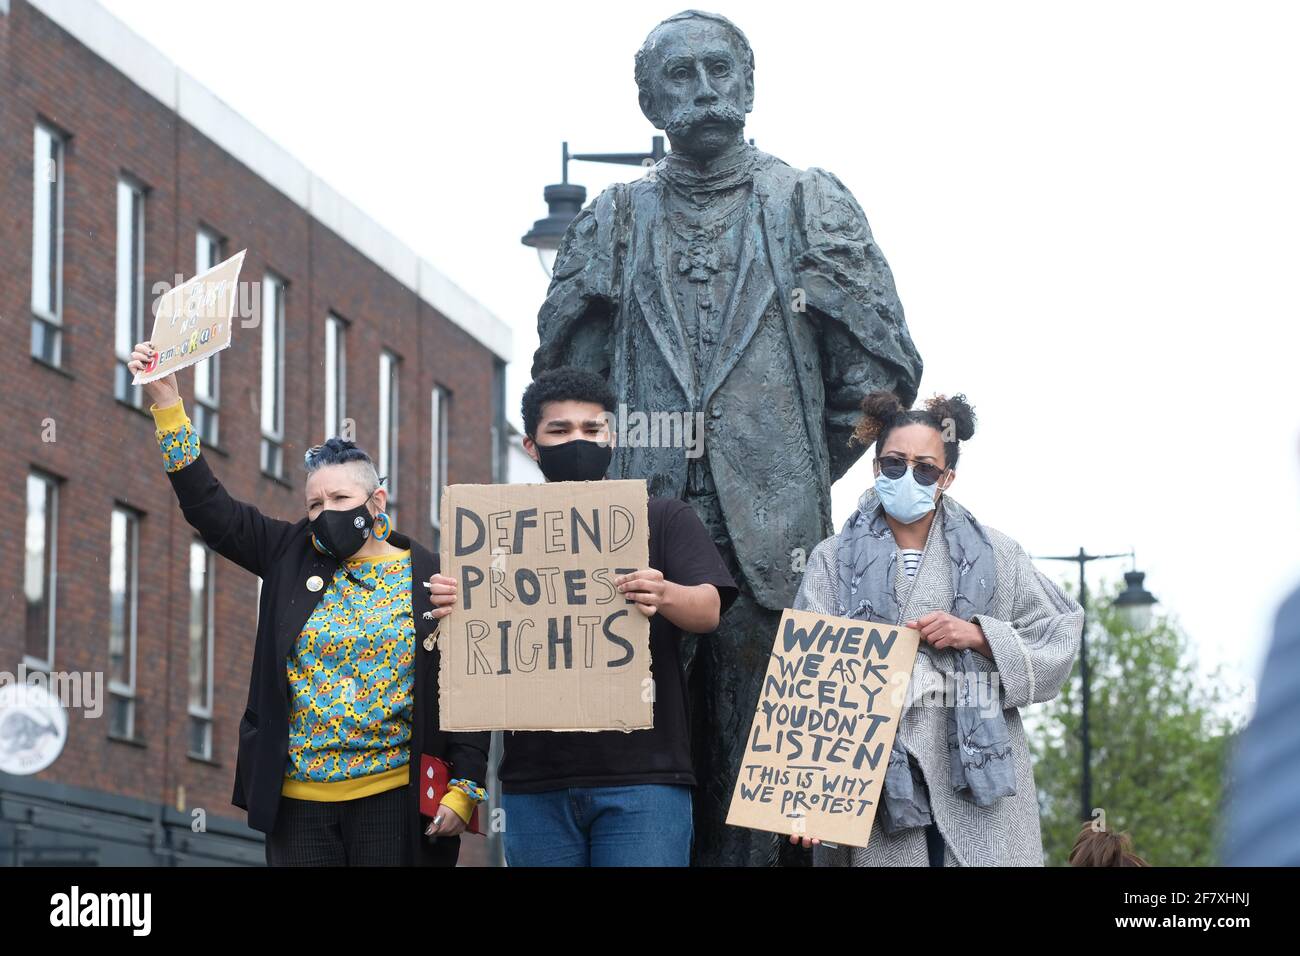 Worcester, Worcestershire, UK – Saturday 10th April 2021 – Kill The Bill protesters demonstrate in Worcester city centre beside a statue of Elgar against the new Police, Crime, Sentencing and Courts Bill ( PCSC ) which they feel will limit their rights to legal protest. Photo Steven May / Alamy Live News Stock Photo